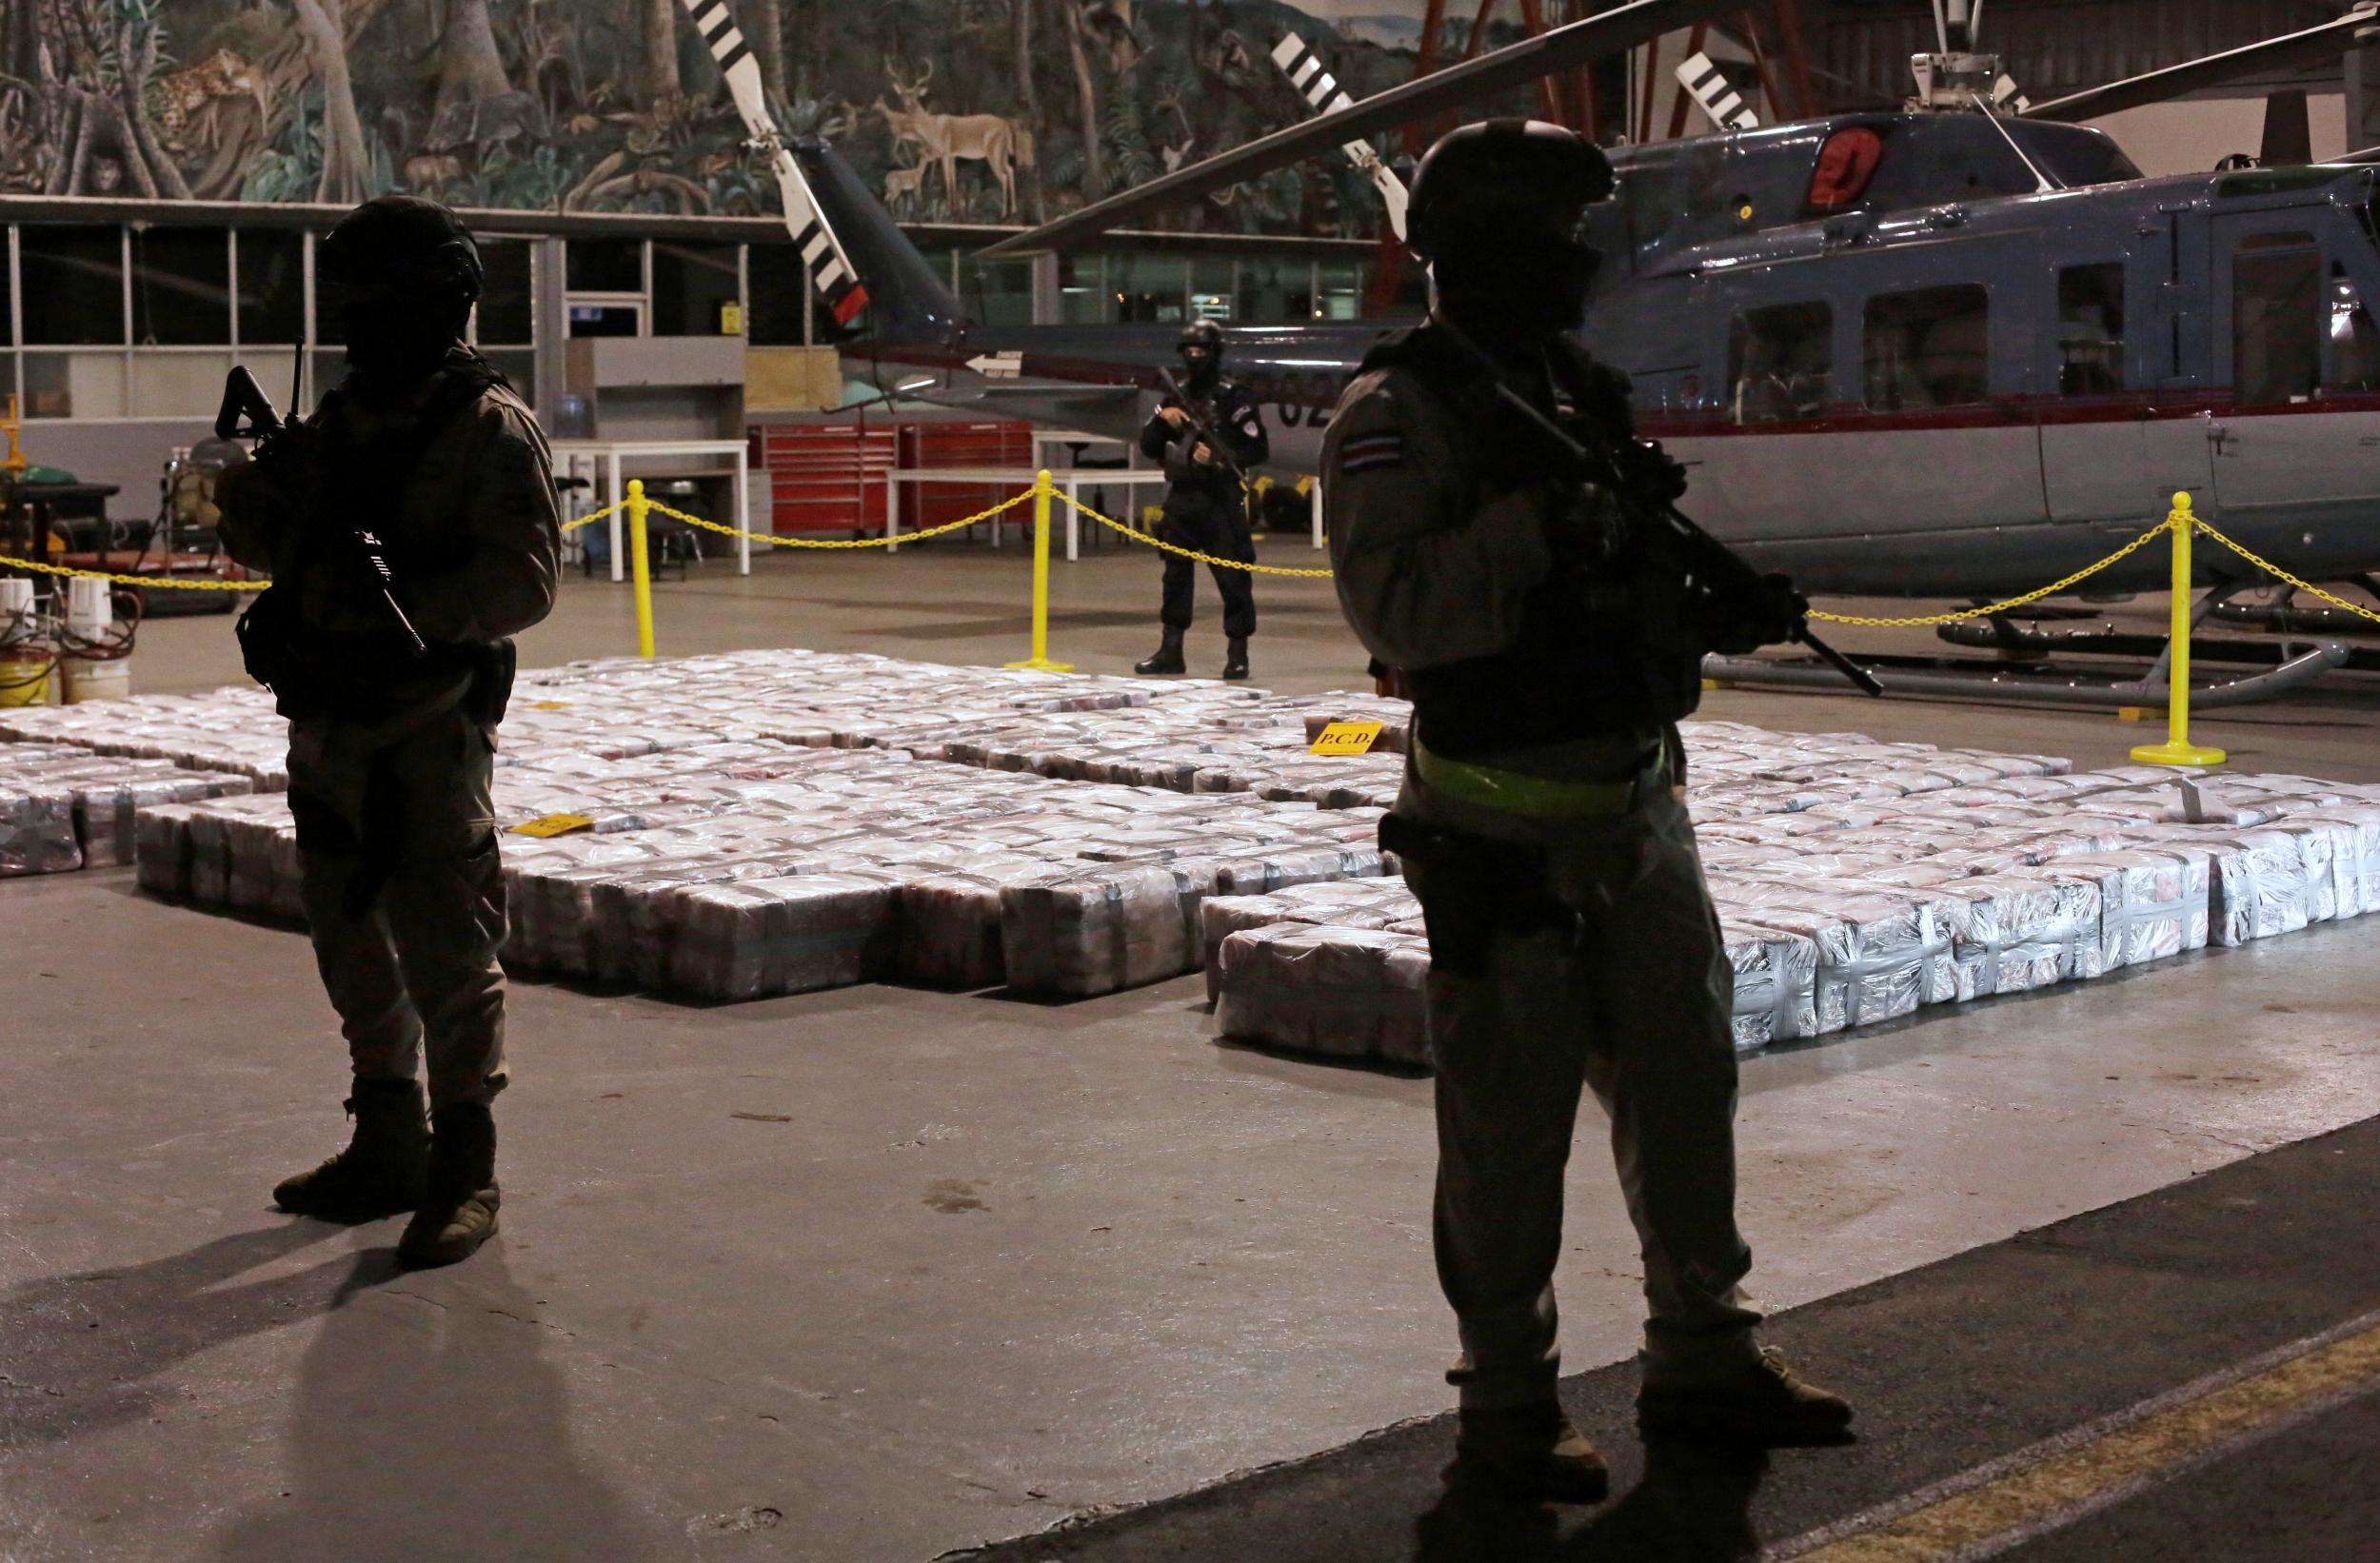 Costa Rican police officers are seen on Saturday February 15, 2020, in front of packages containing cocaine seized during an operation in the Caribbean.